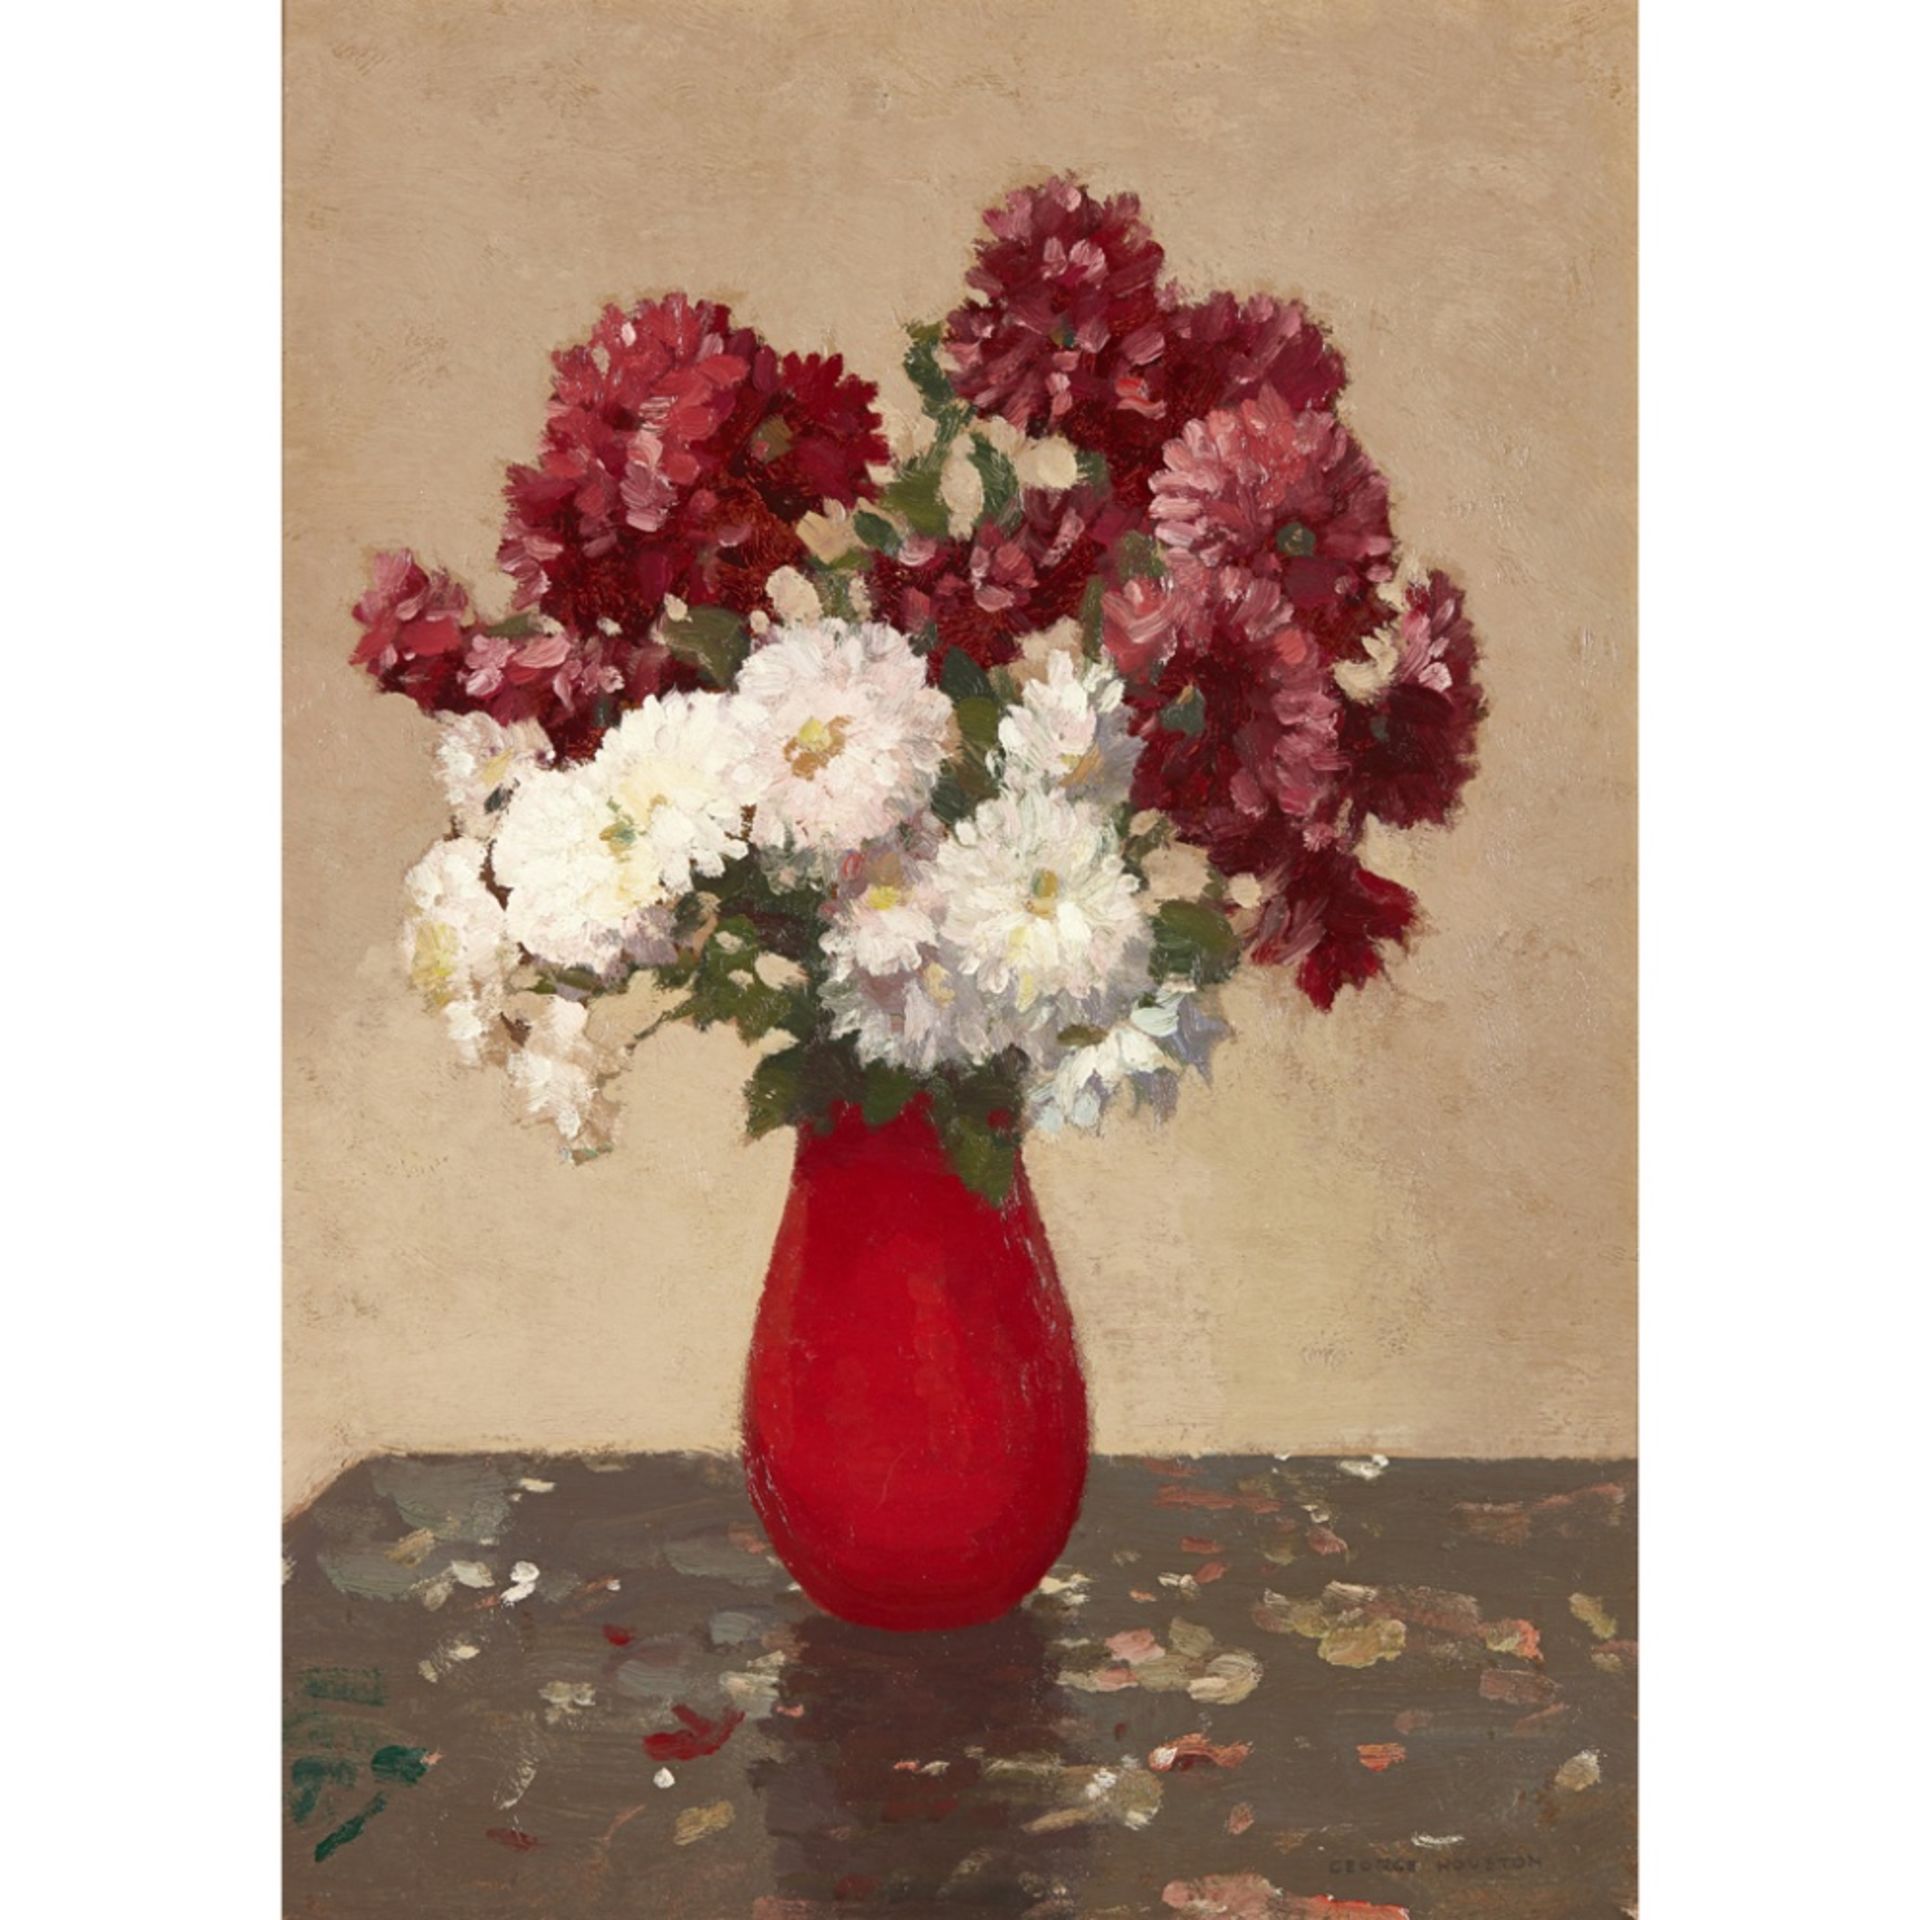 GEORGE HOUSTON R.S.A., R.S.W., R.I. (SCOTTISH 1869-1947)STILL LIFE IN A RED VASE Signed, oil on